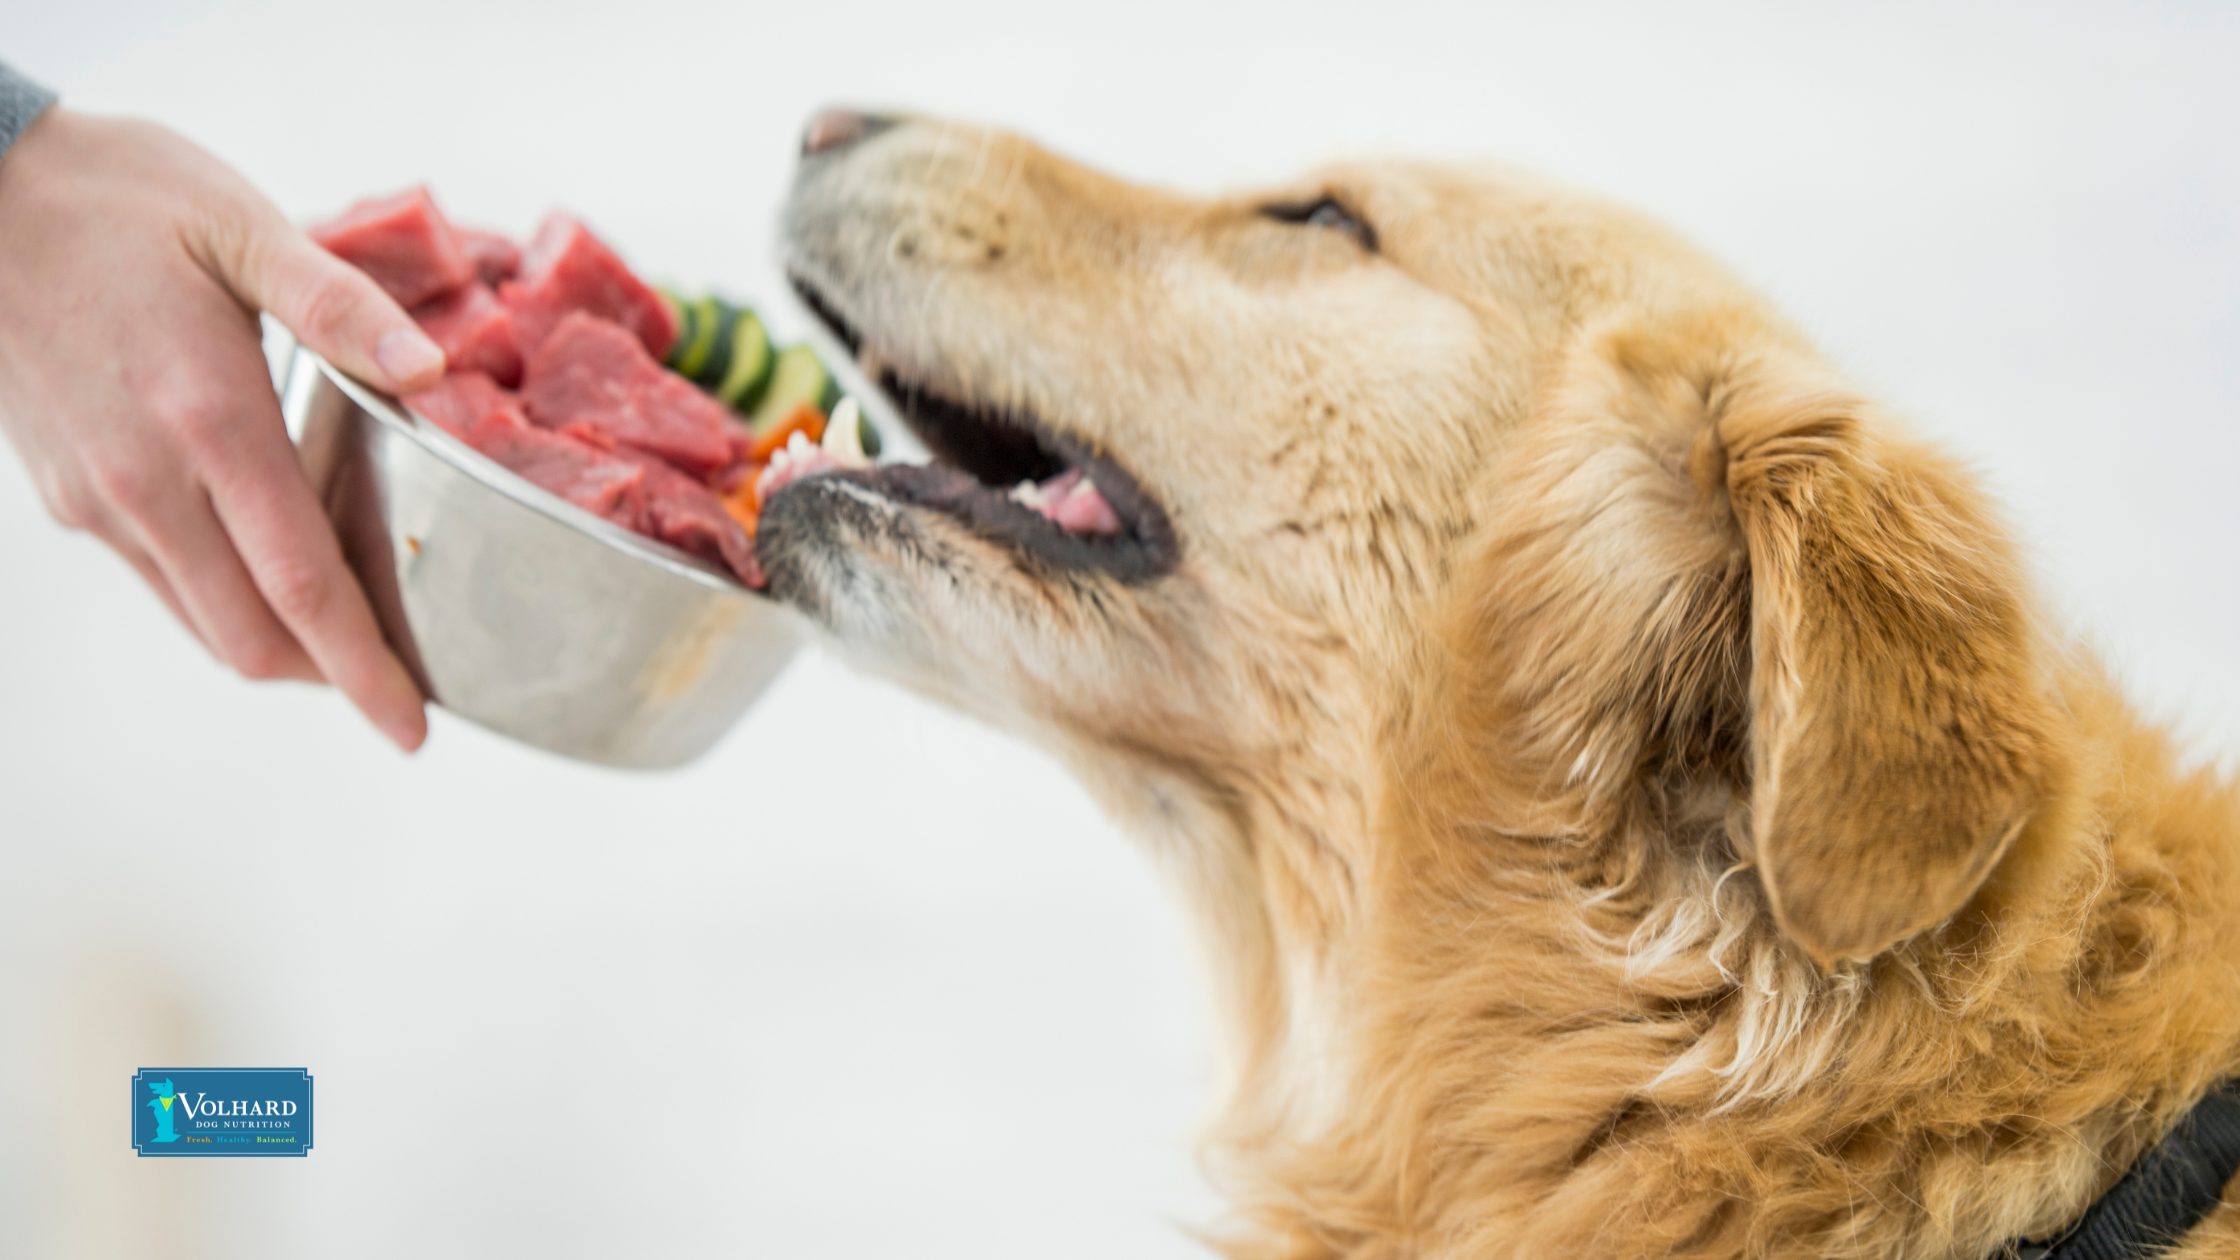 10 Human Foods for Dogs: What Can Your Furry Friend Safely Enjoy?